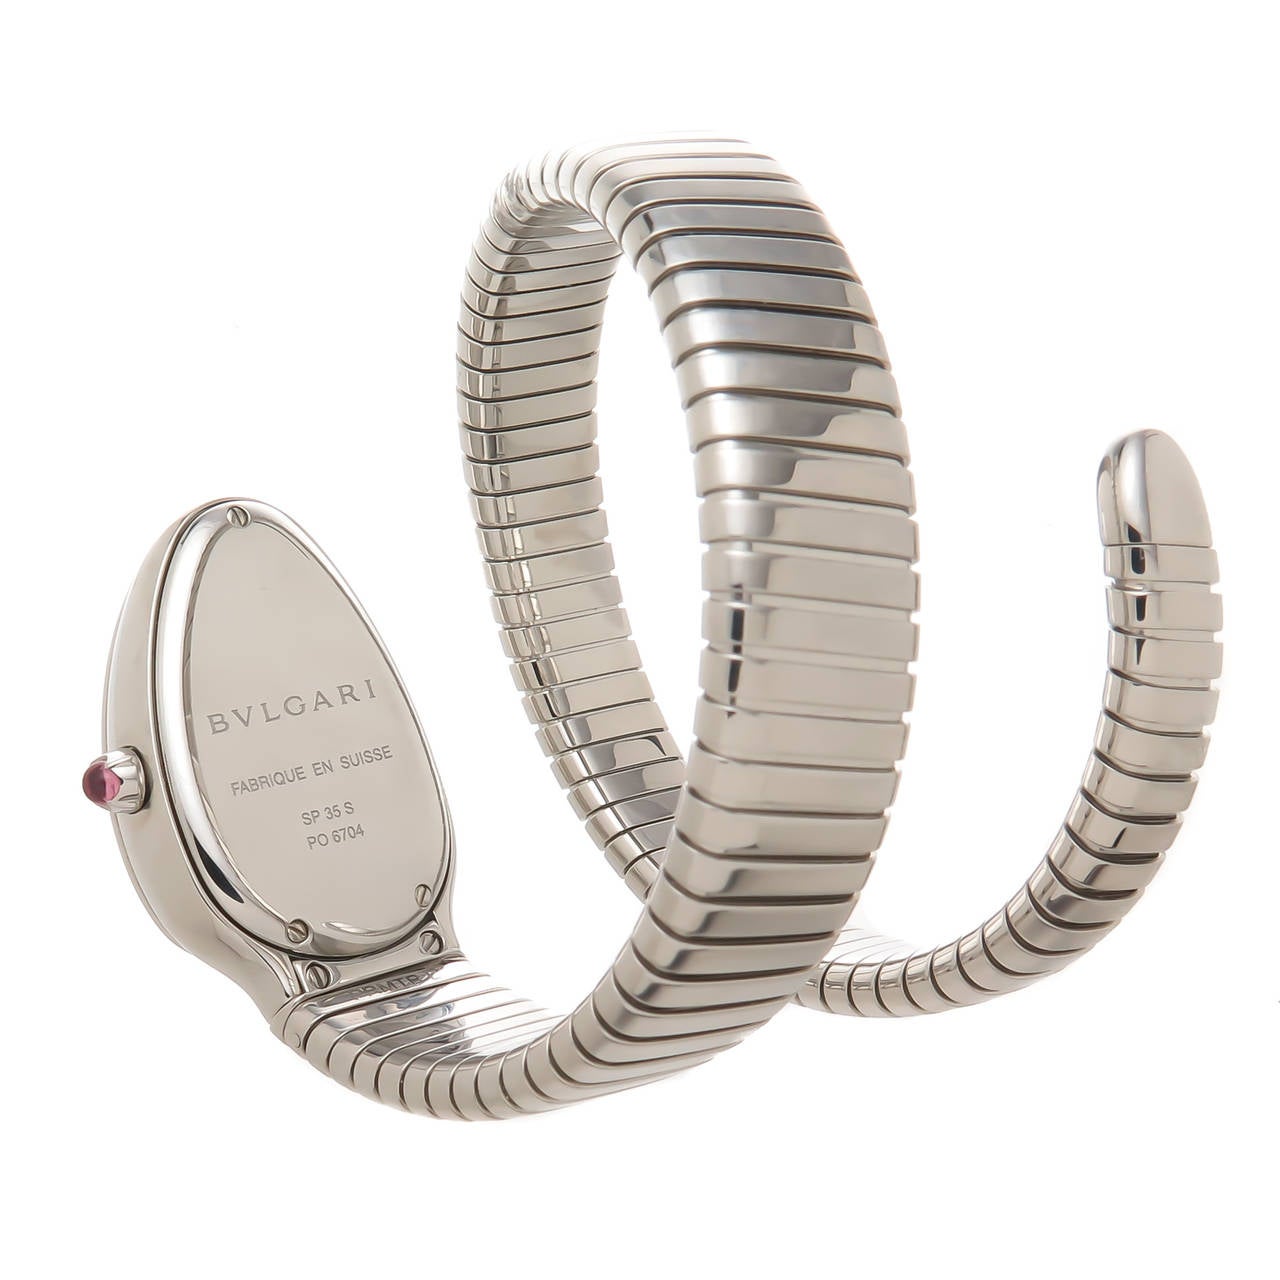 Circa 2013 Bulgari Serpenti Spiga Wrist Watch in Stainless Steel, flexible coiled steel snake bracelet, will adjust to fit most any wrist. 35 MM head, White textured dial with raised markers, Quartz movement, Rubelite Cabochon Crown. Original